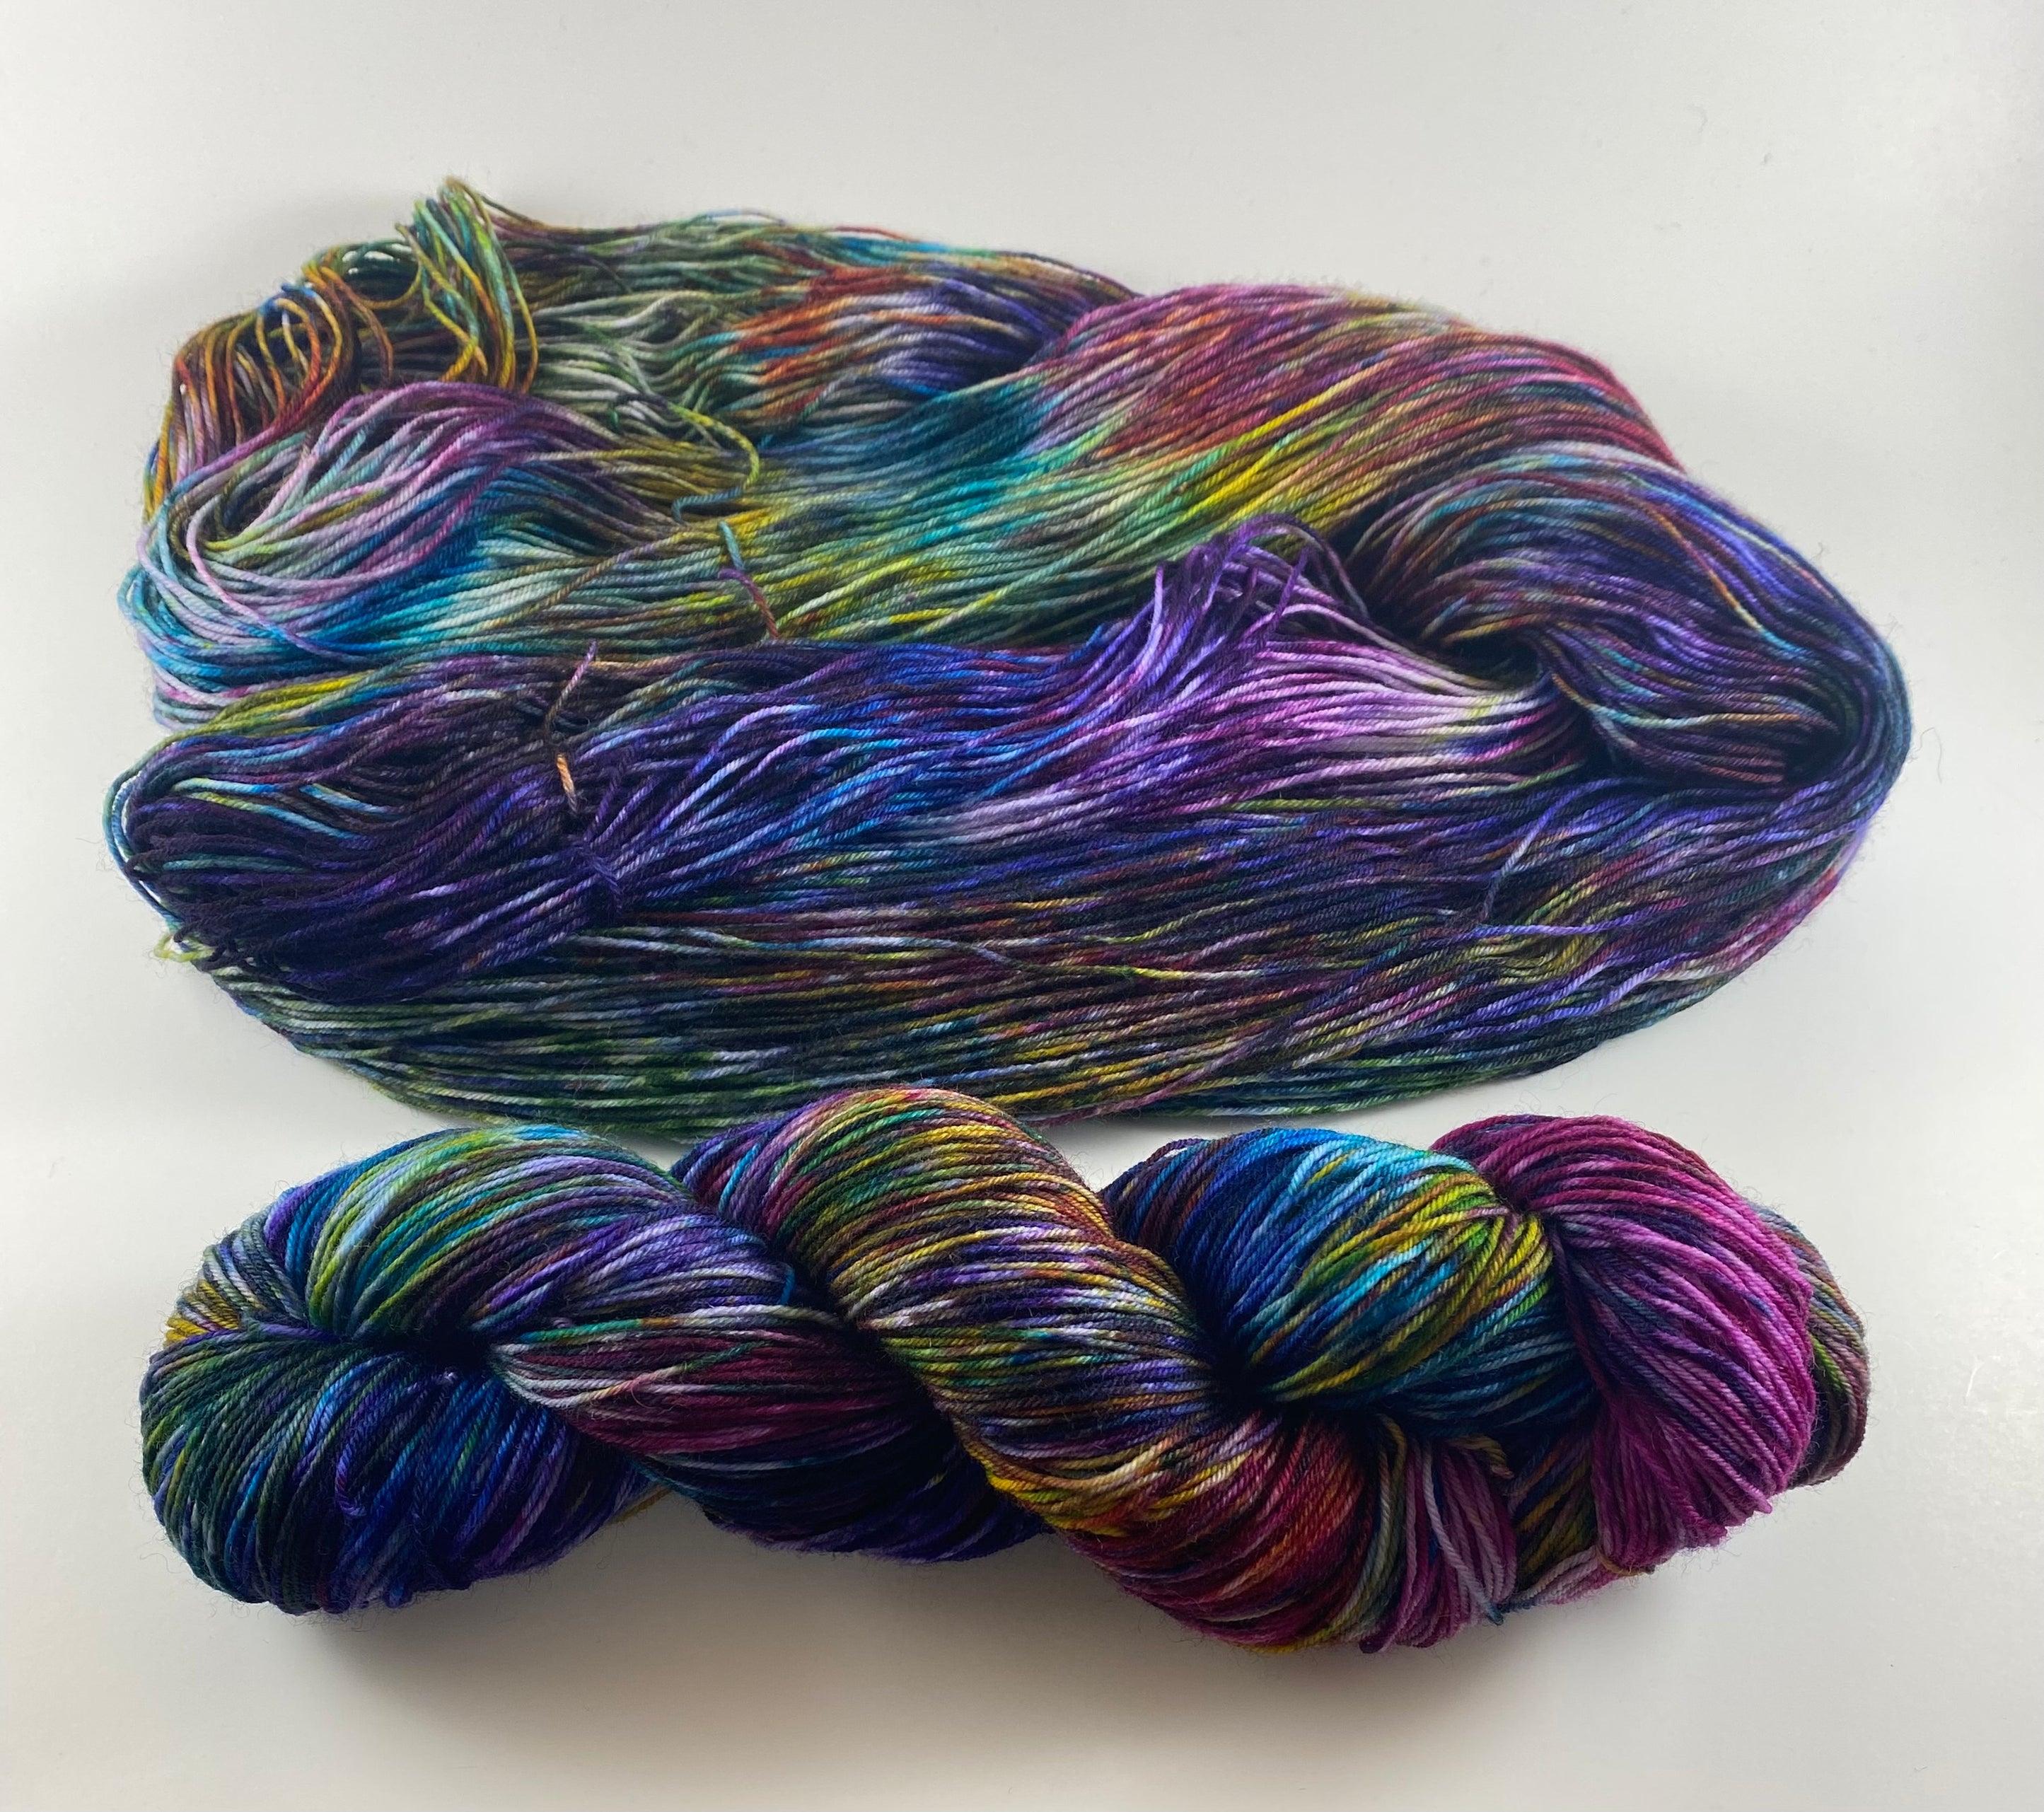 multicolored hand-dyed yarn in colors that look like stained glass - or a bag of dice